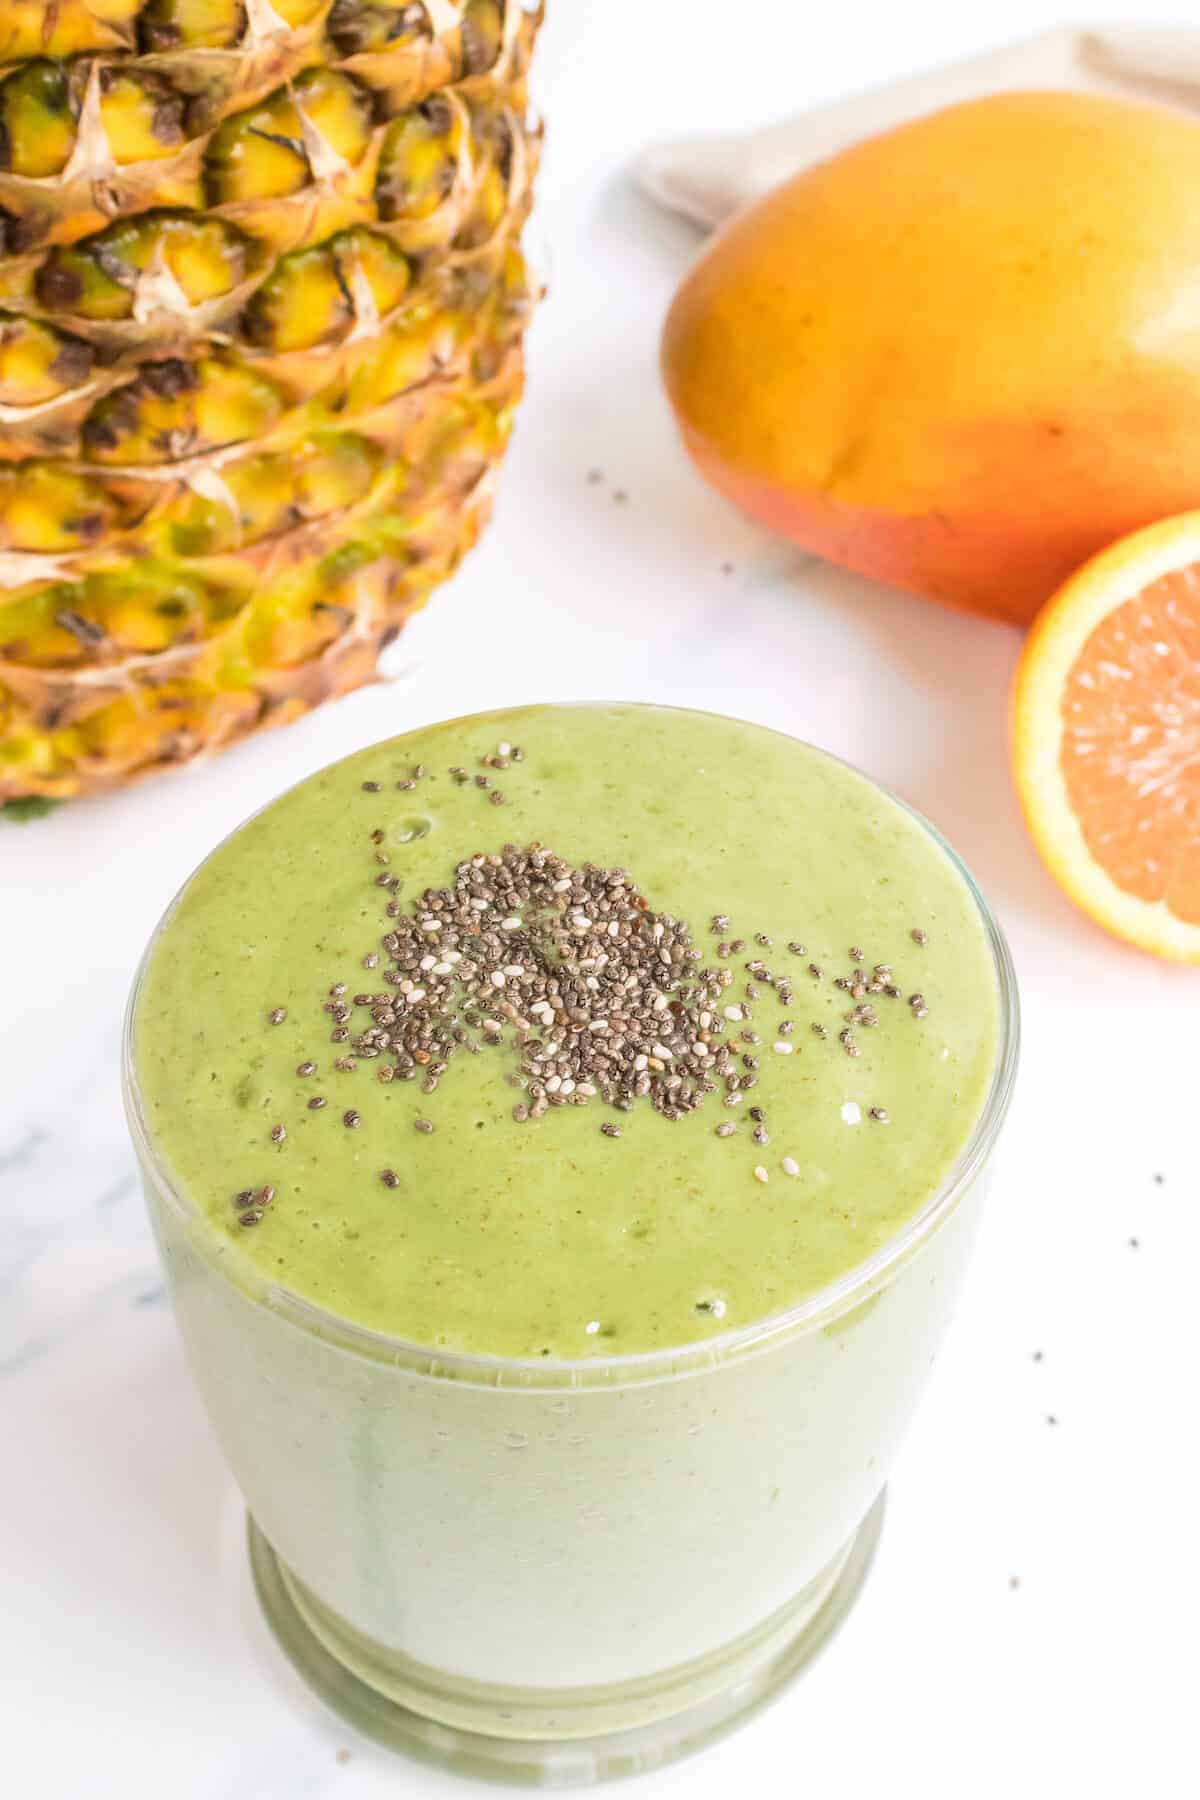 chia seeds on top of the tropical green smoothie in a glass.